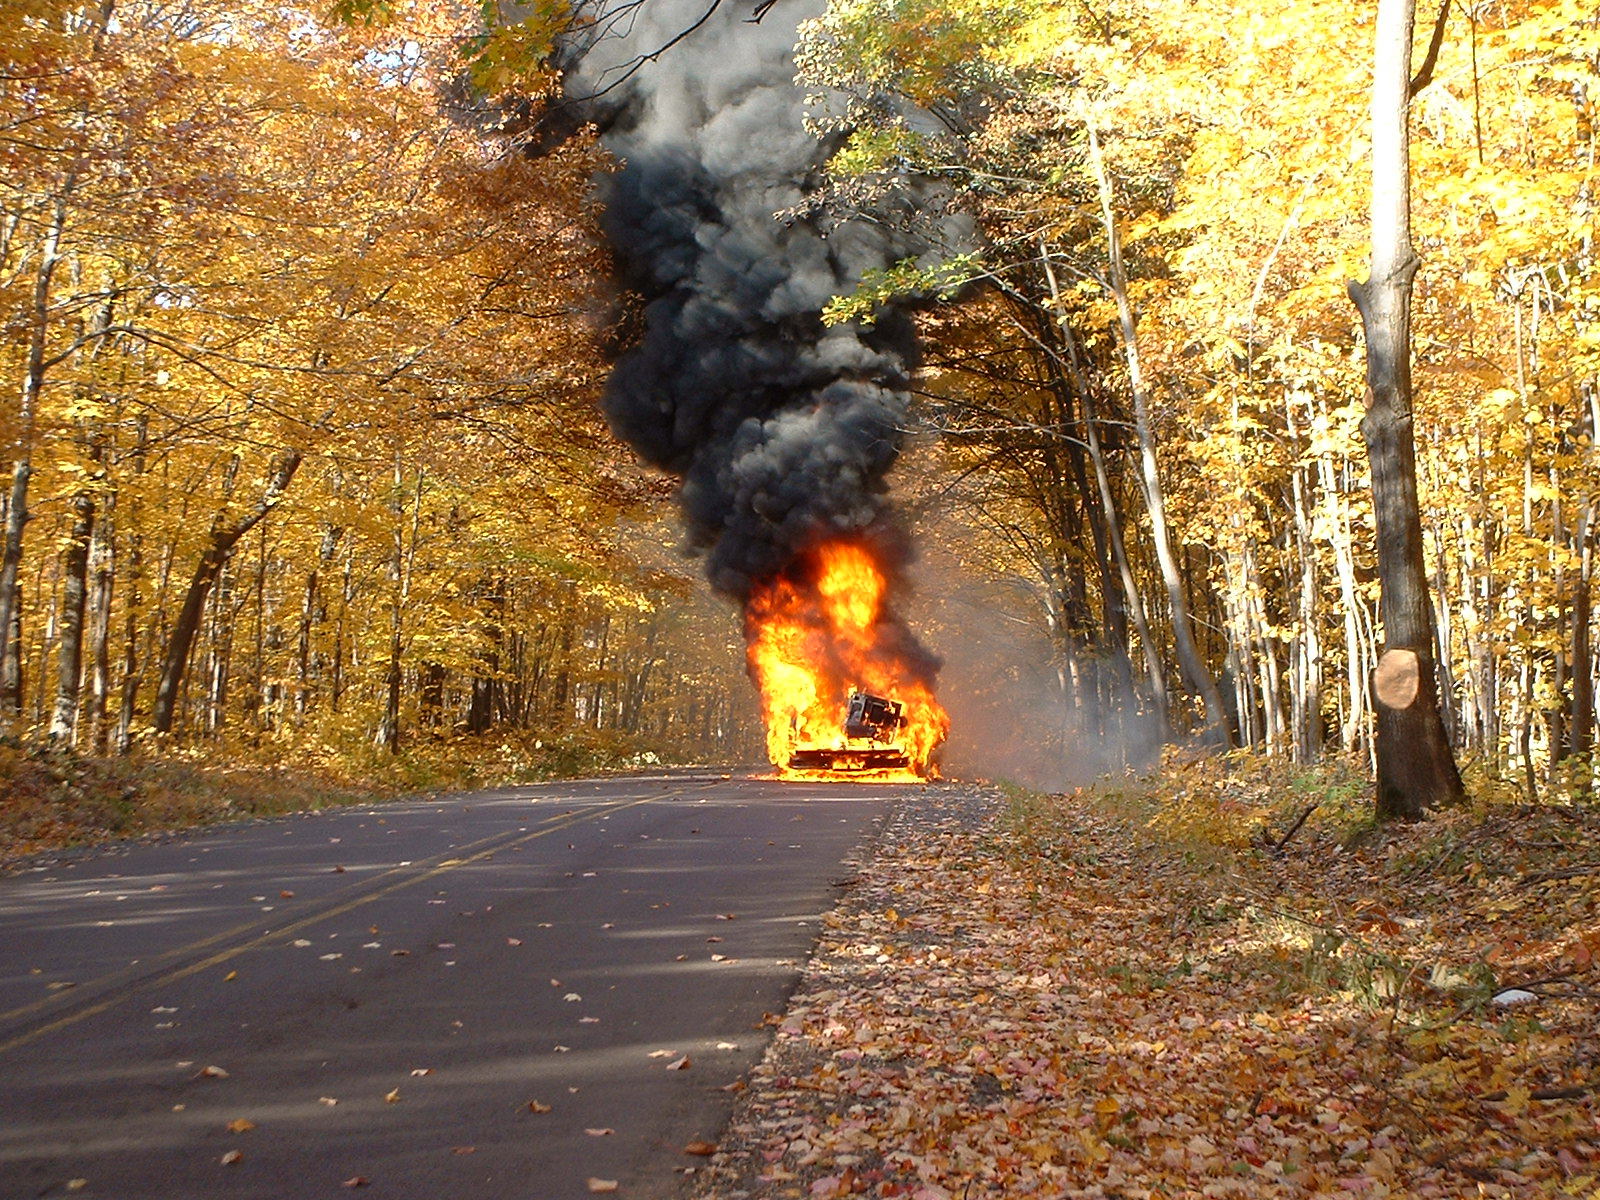 Autumn on the road is burning car wallpaper and image, picture, photo